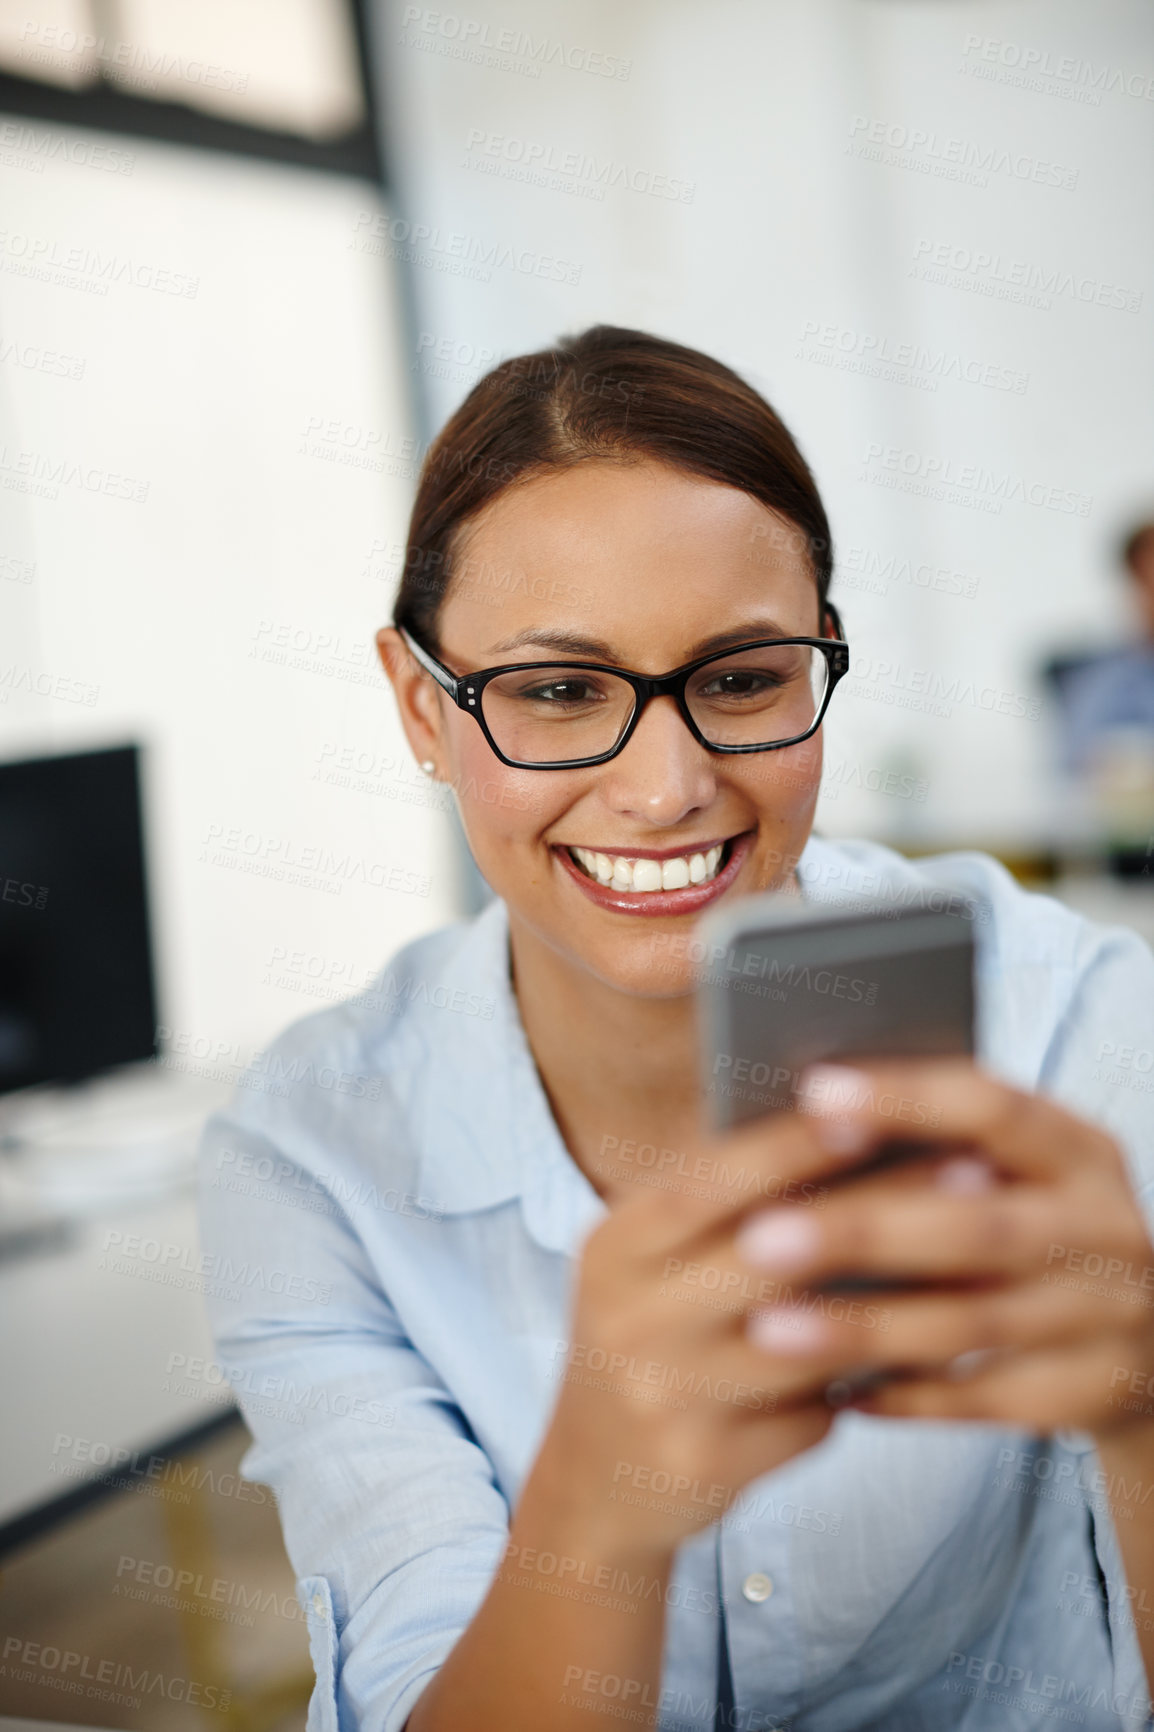 Buy stock photo Shot of a young woman smiling while using her cellphone at work